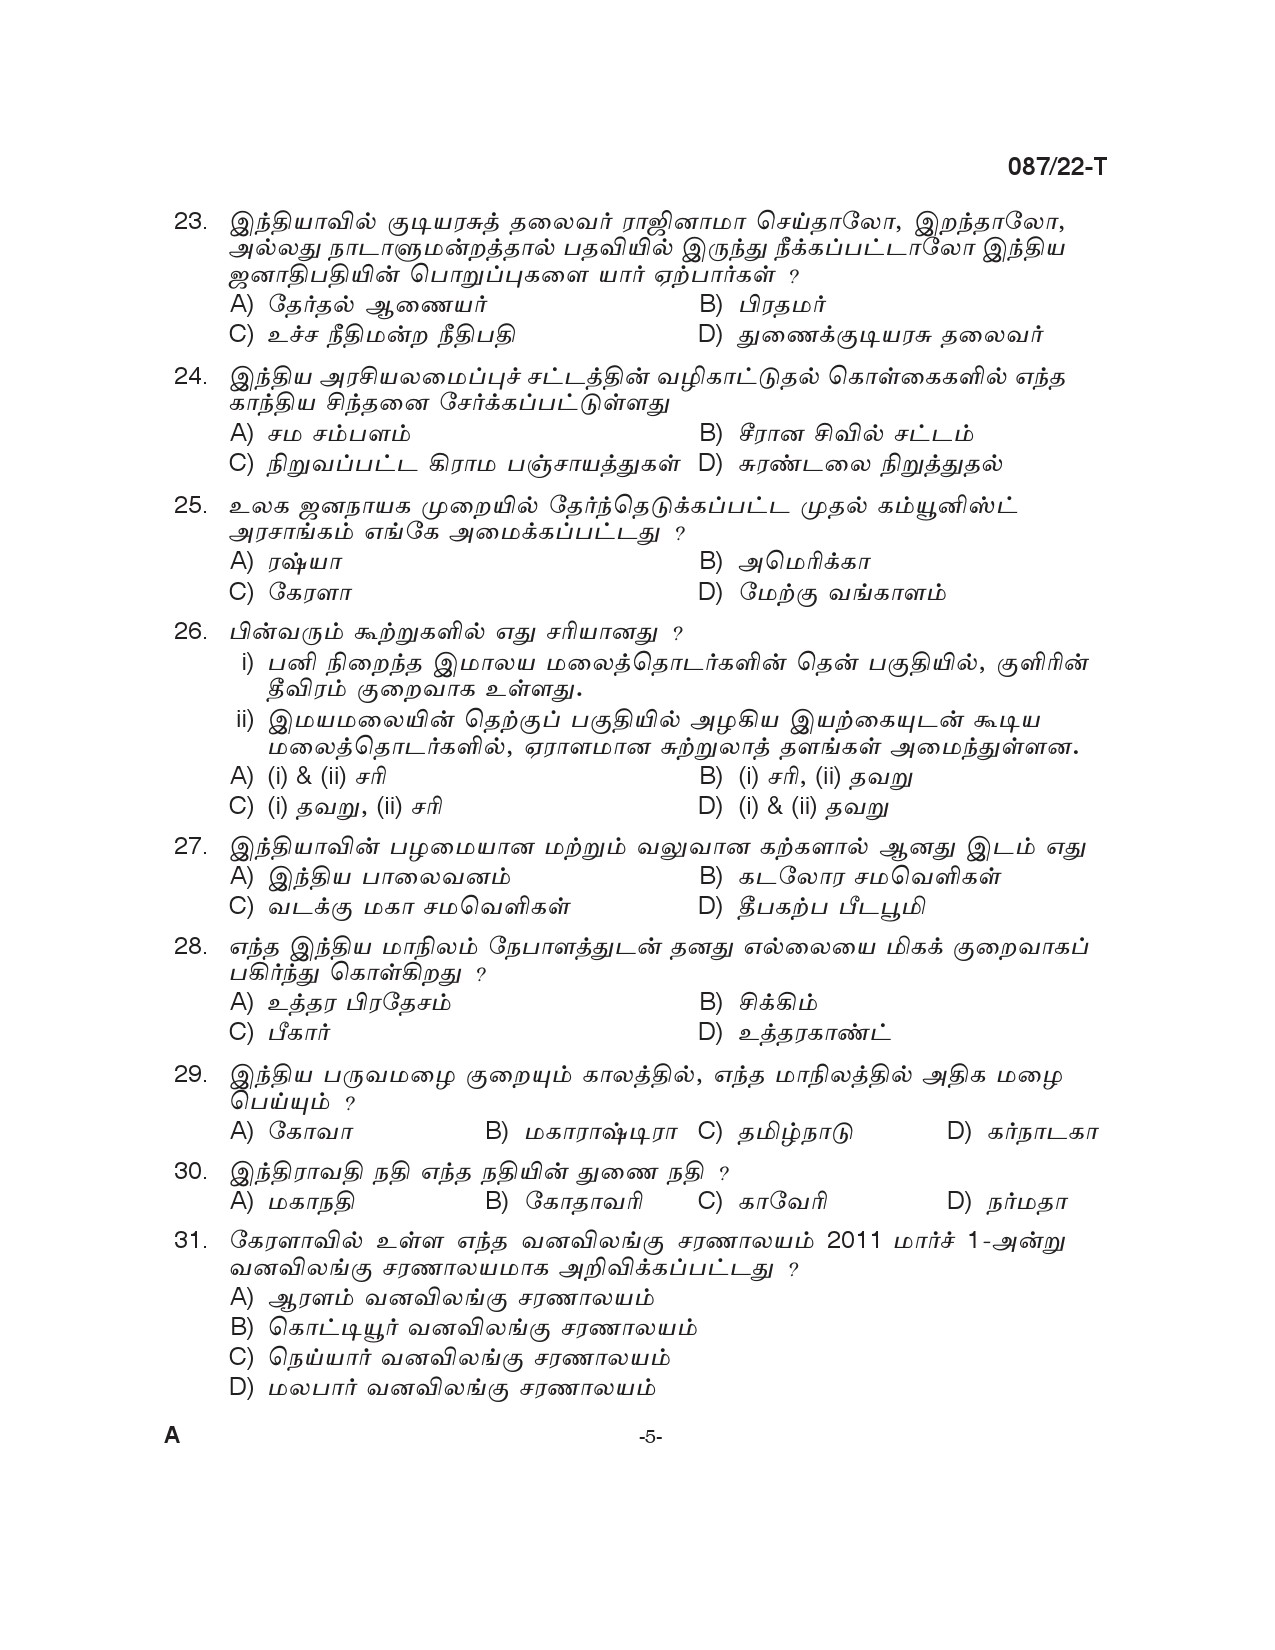 KPSC Driver and Office Attendant Tamil Exam 2022 Code 0872022 T 4